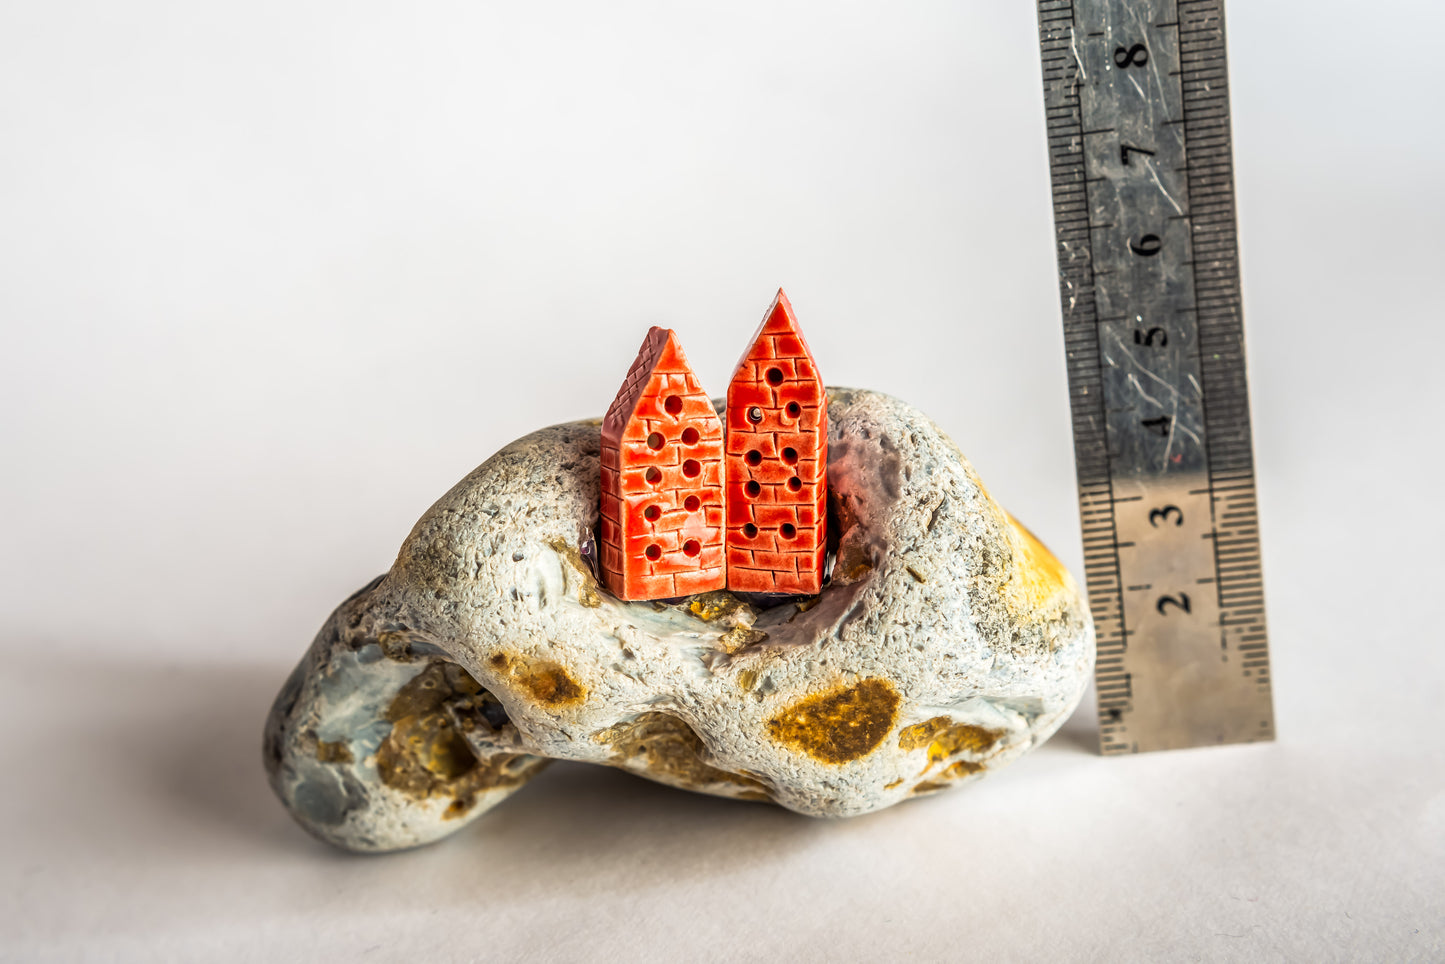 Hand-built red ceramic houses on a rock